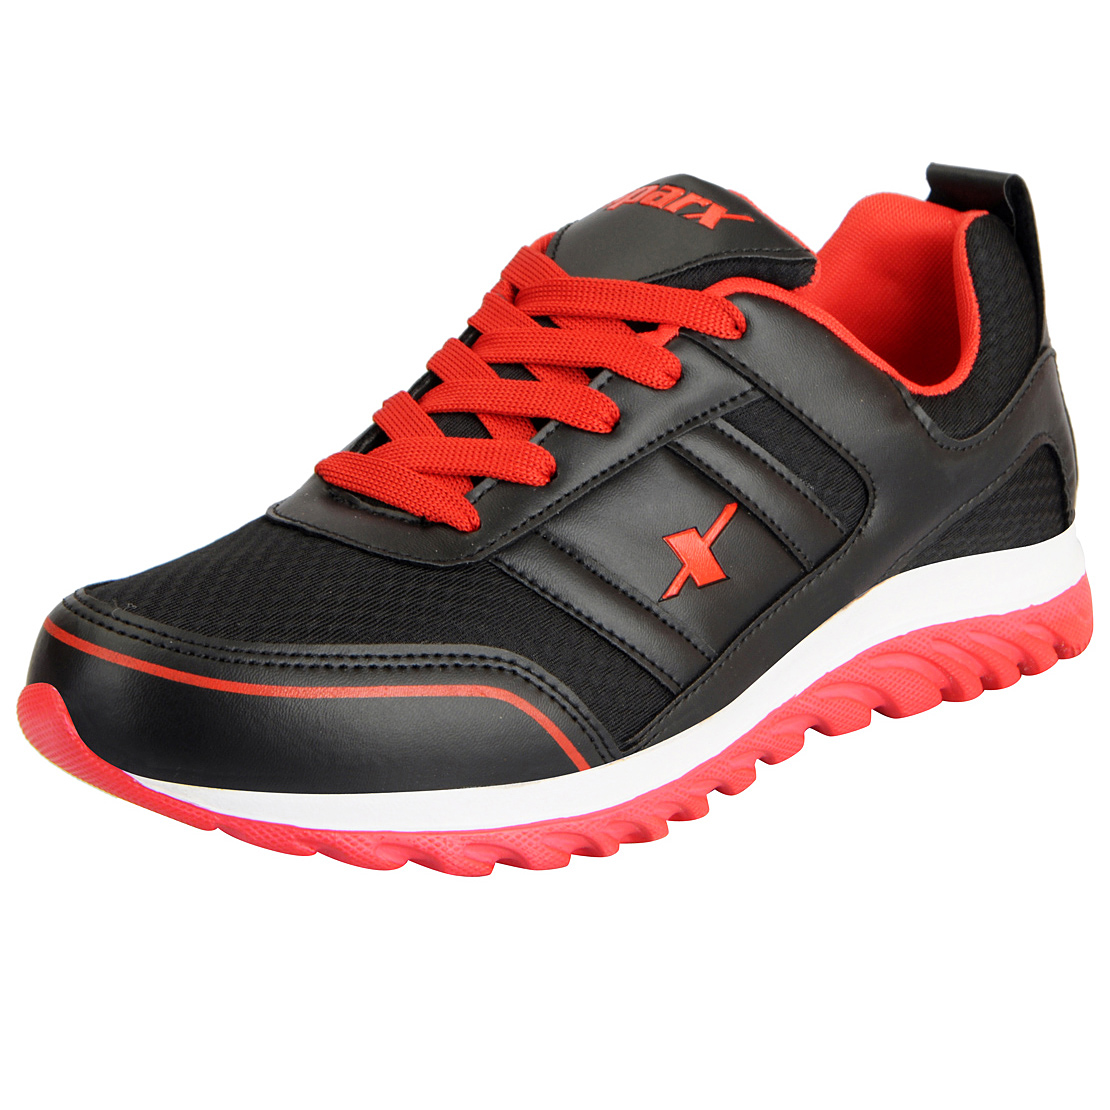 Buy Sparx Black Red Men's Training Shoes Online @ ₹999 from ShopClues